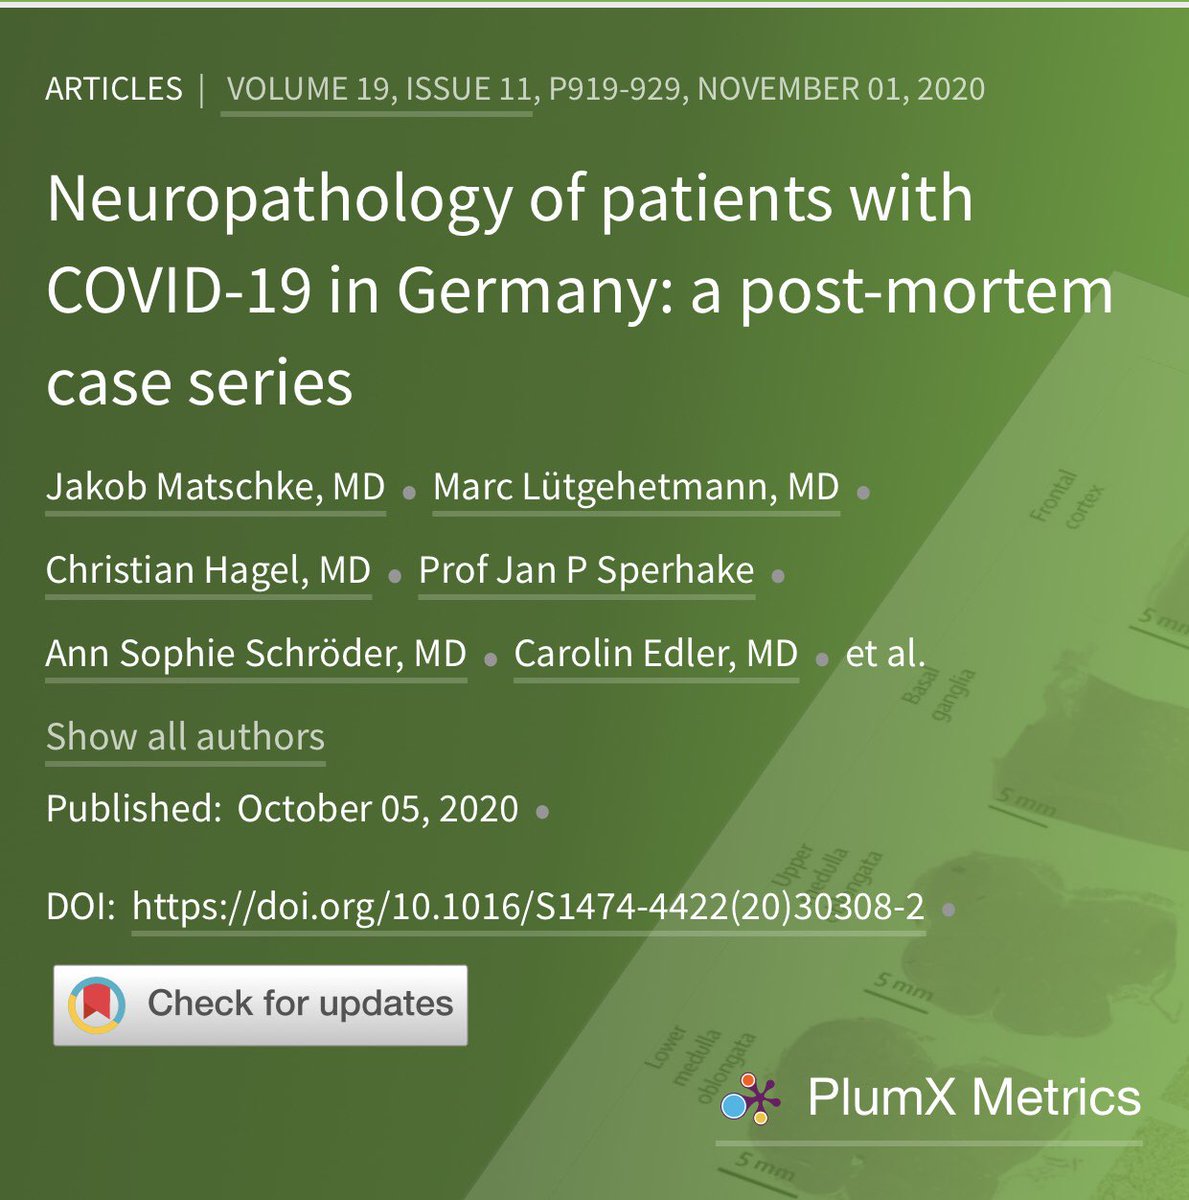 6/ Leading the team to reference this separate Lancet study, which found COVID-19 viral RNA/protein in the brainstem of COVID-19 human patients via autopsy:  https://www.thelancet.com/journals/laneur/article/PIIS1474-4422(20)30308-2/fulltext